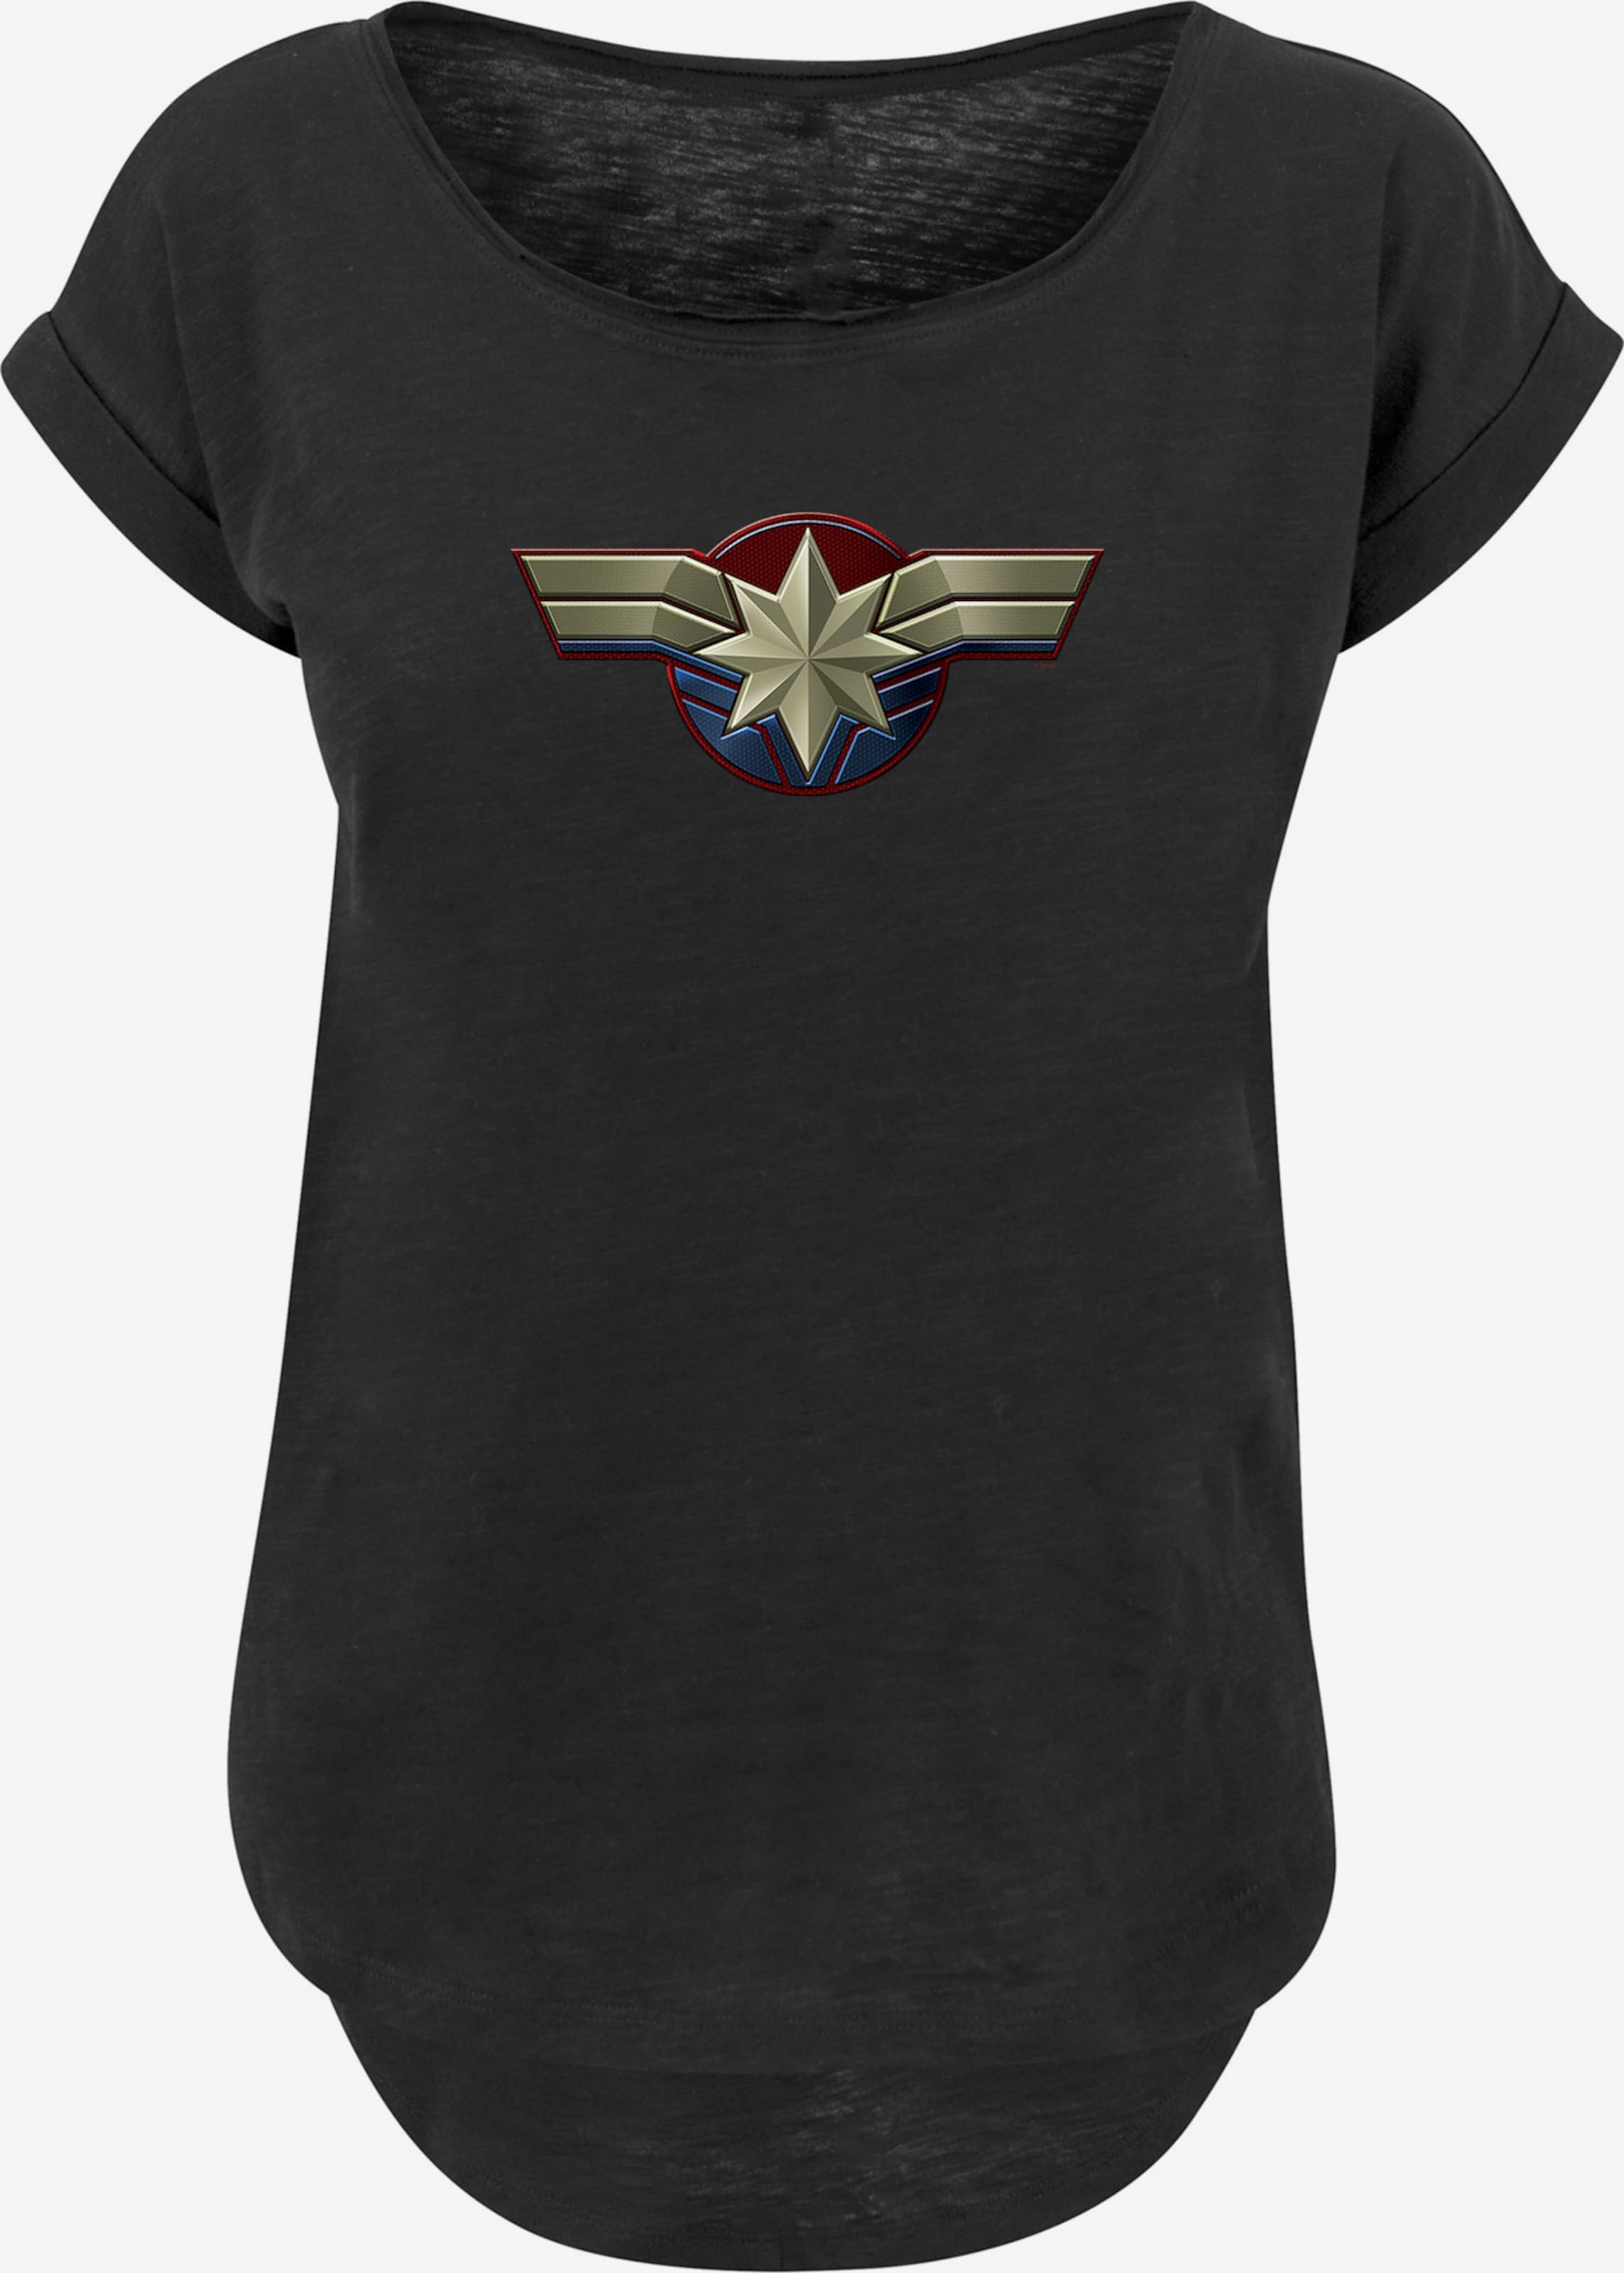 F4NT4STIC Shirt YOU \'Captain Black | Marvel ABOUT in Chest Emblem